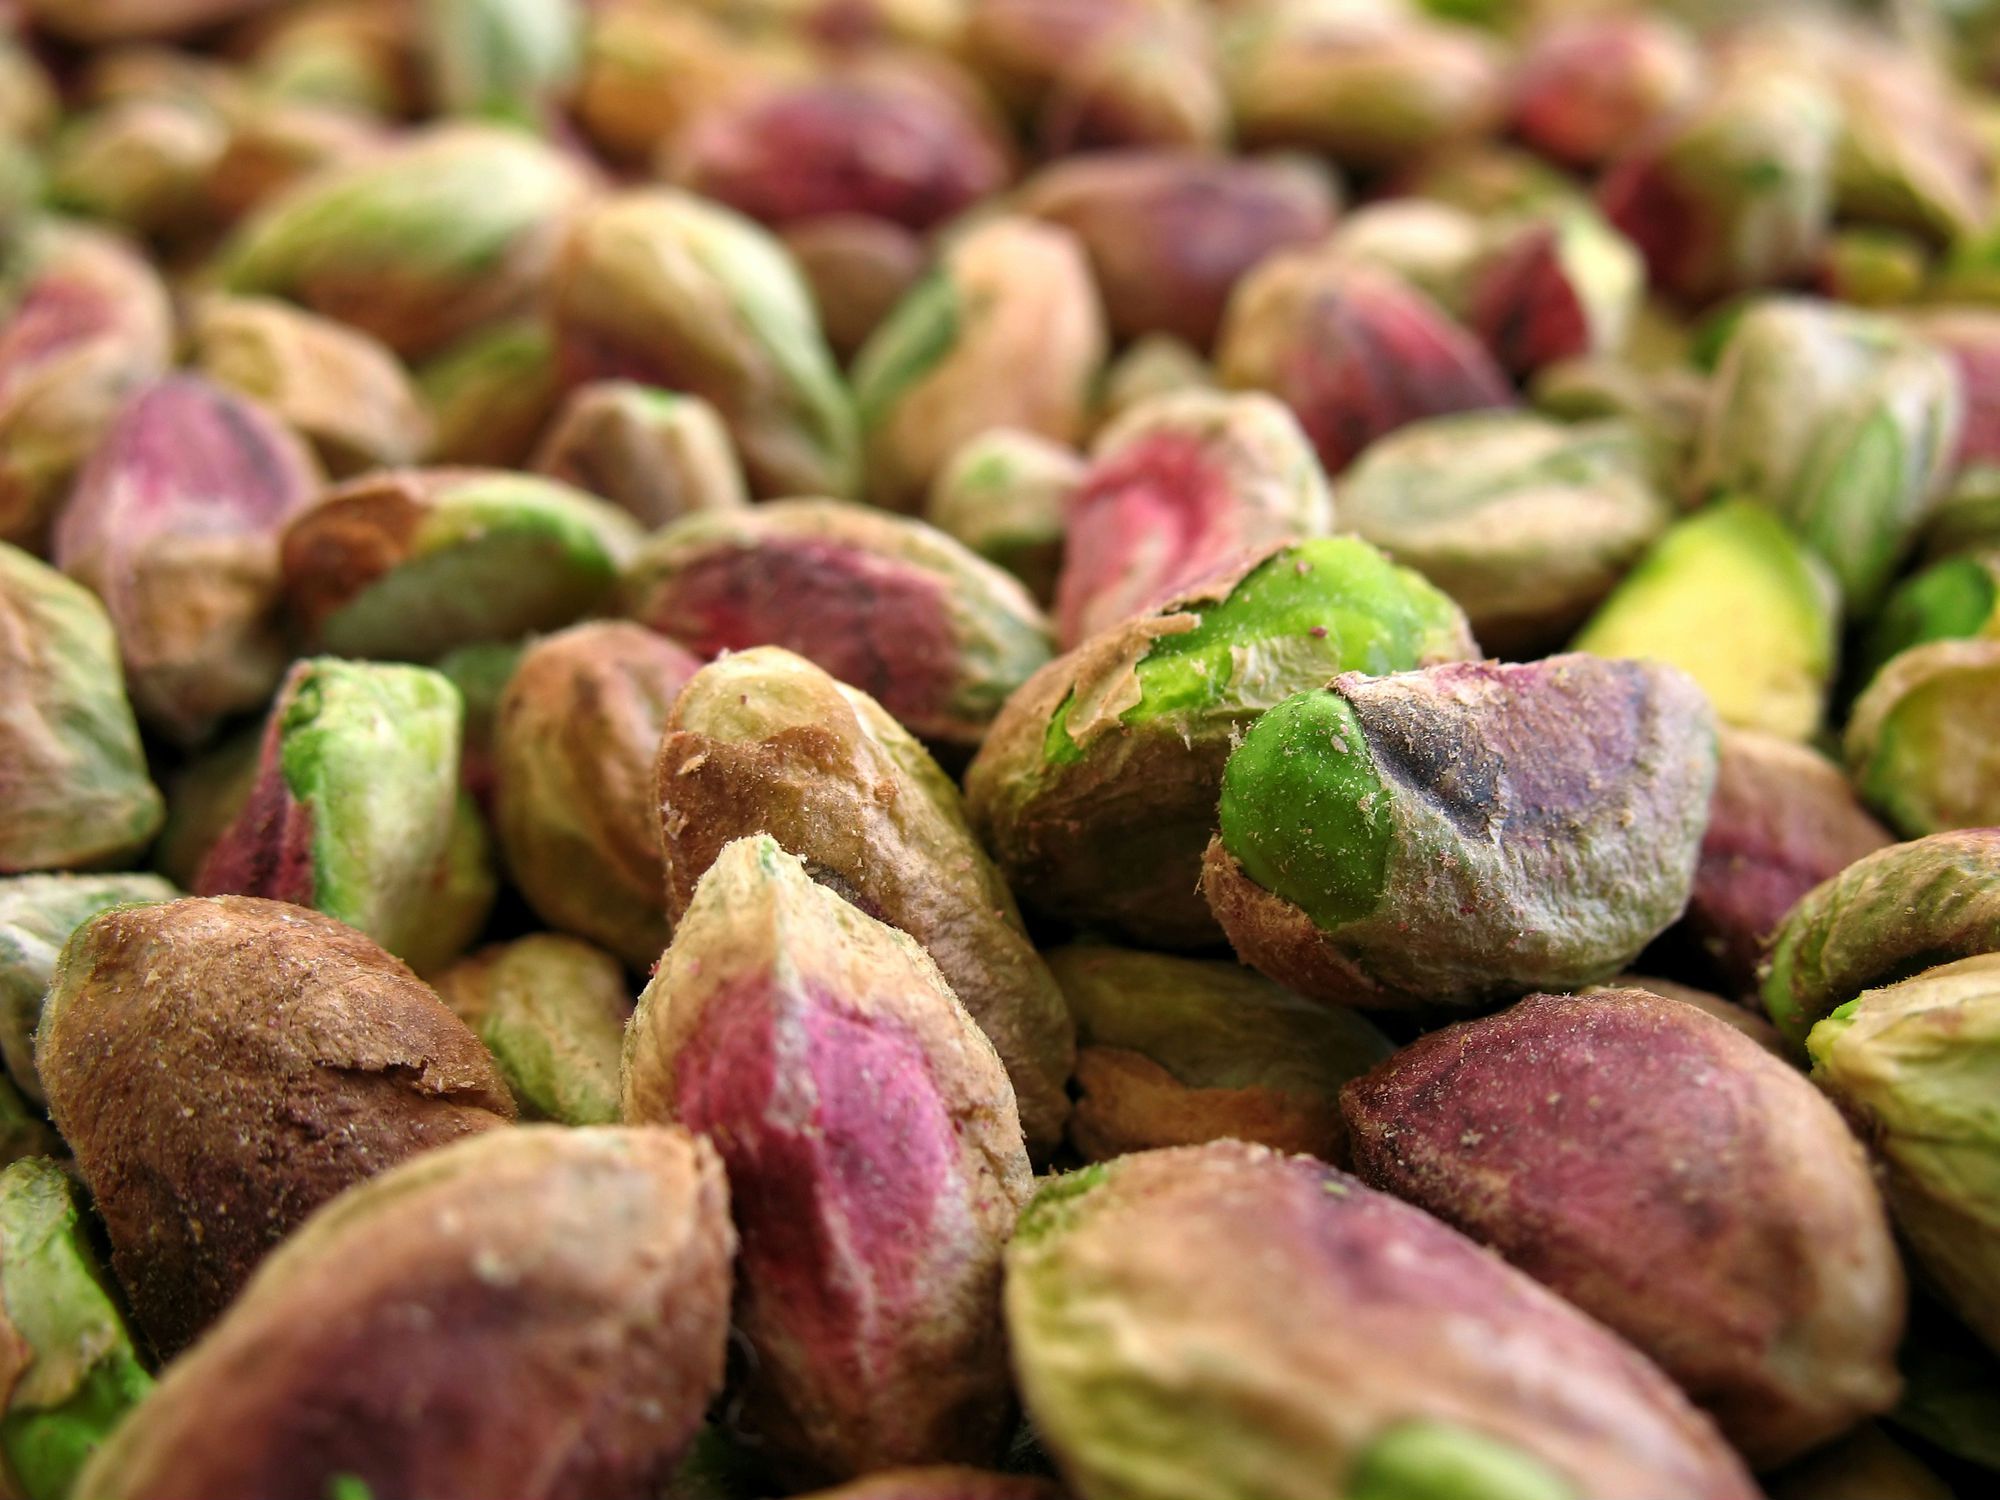 Export Fandoghi pistachio kernels to India at reasonable prices